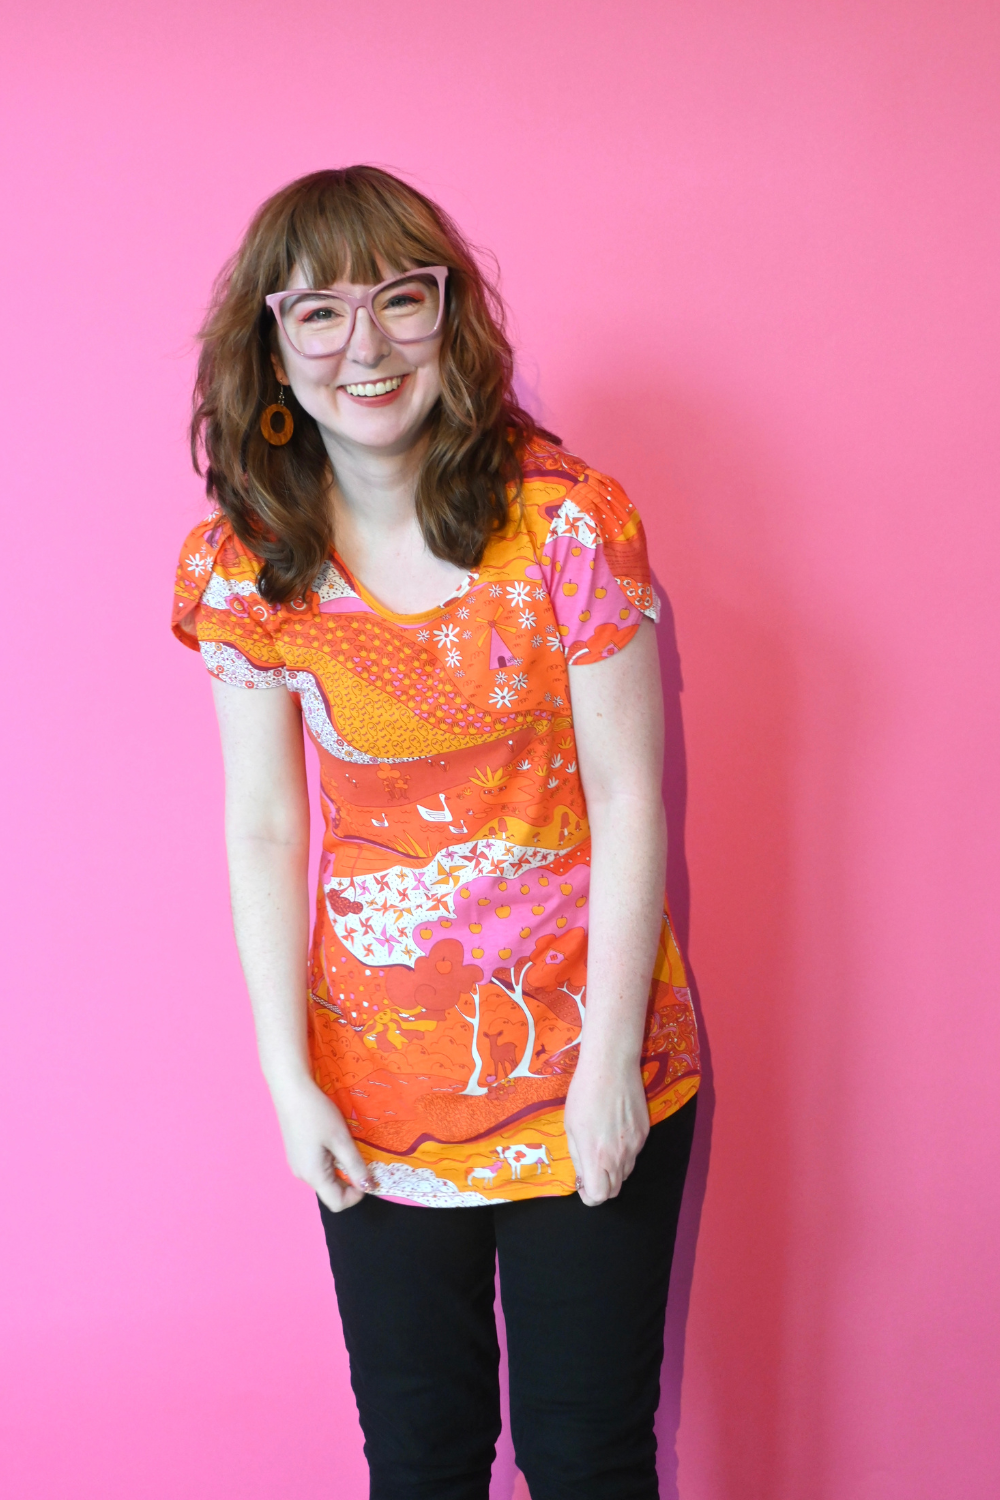 Model wearing glasses and shirt with graphic of a landscape in orange and pink